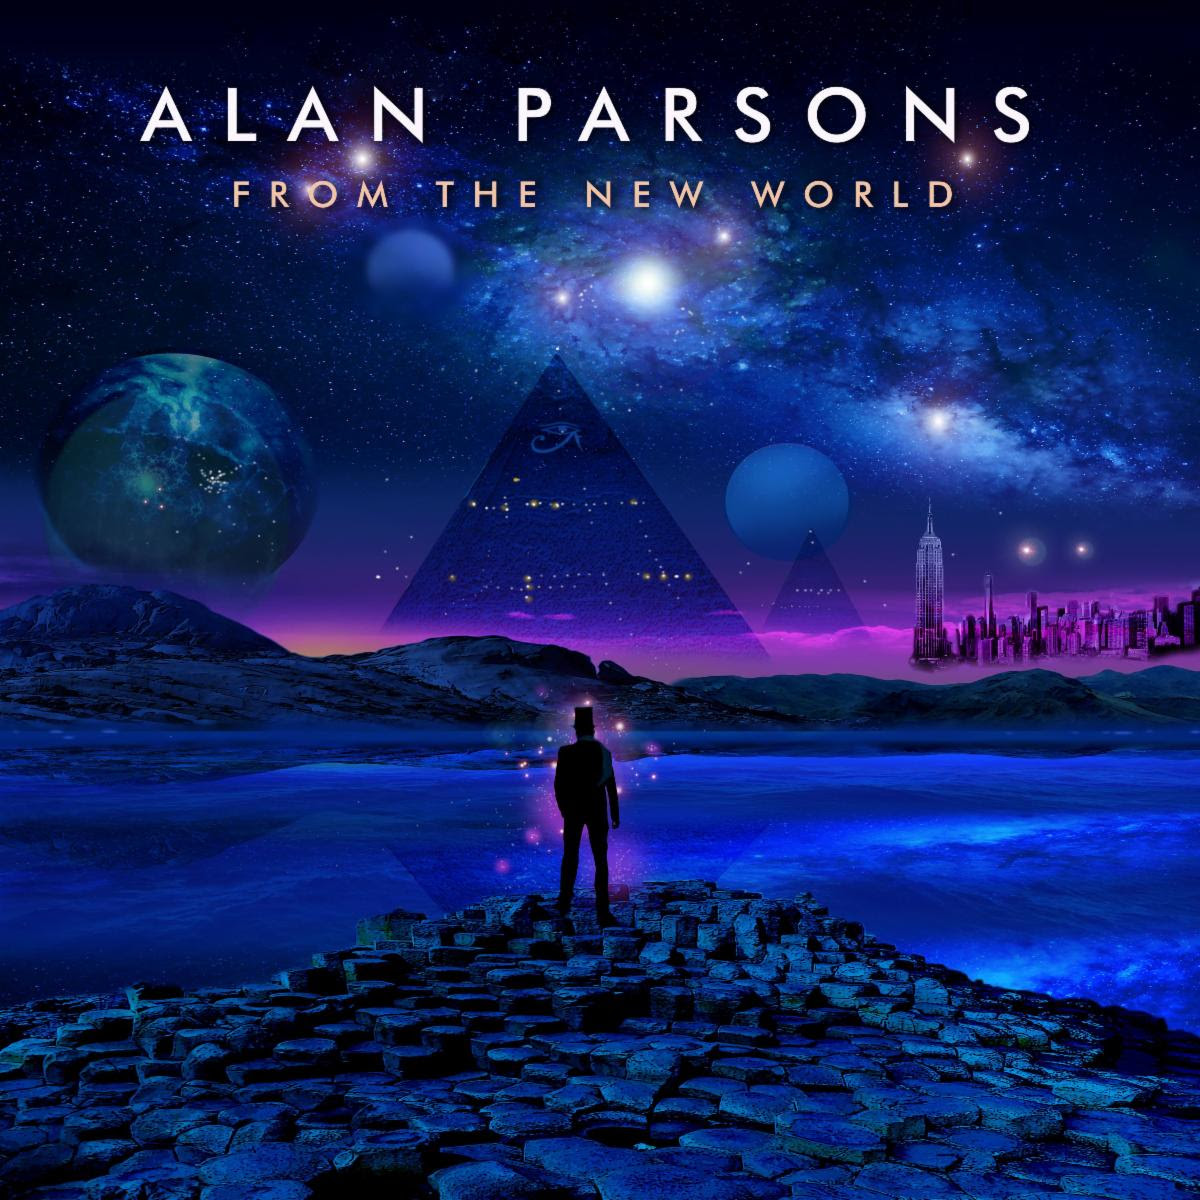 ALAN PARSONS: 'FROM THE NEW WORLD'